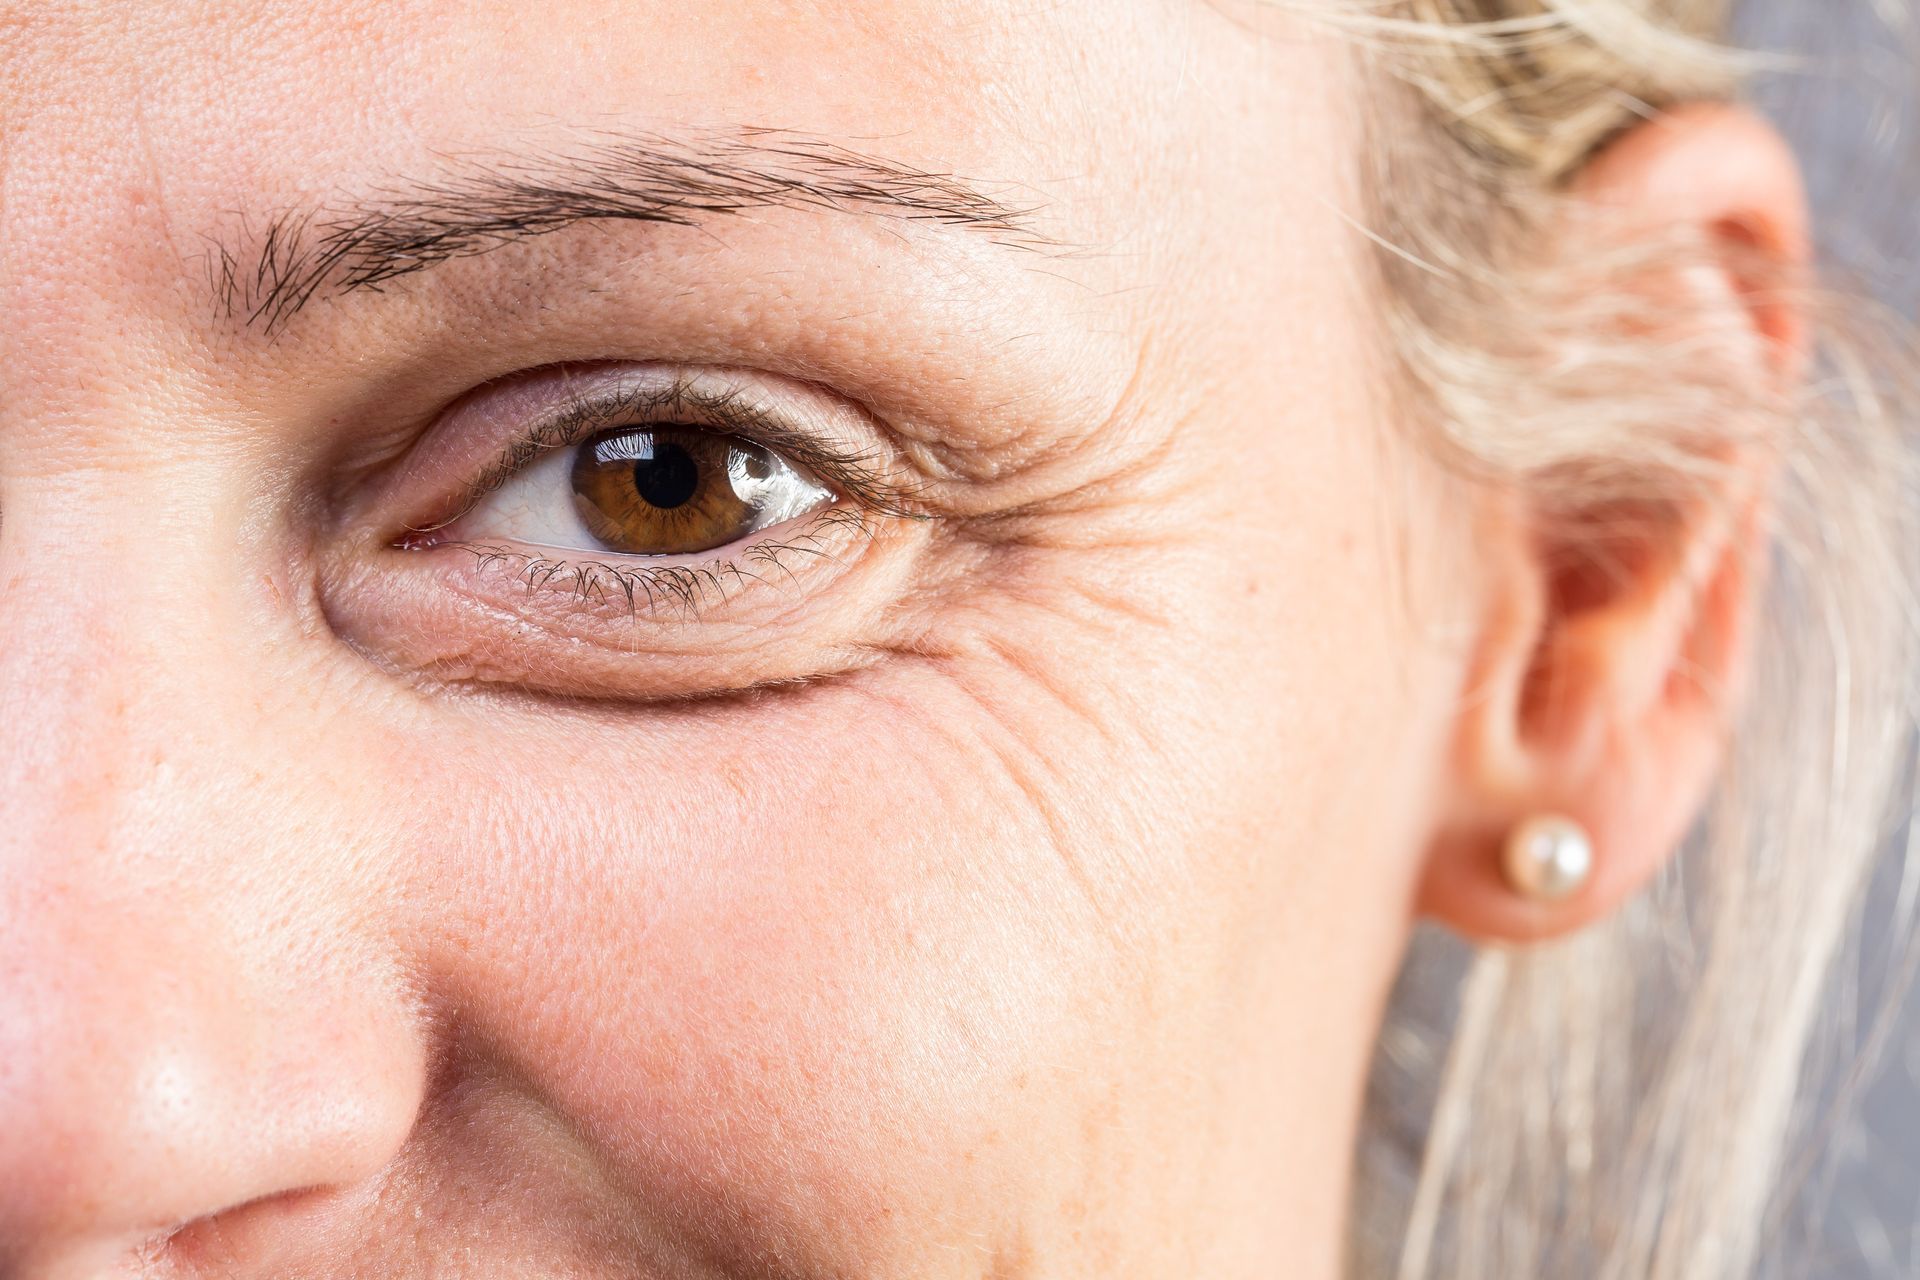 A close up of a woman 's eye with wrinkles.